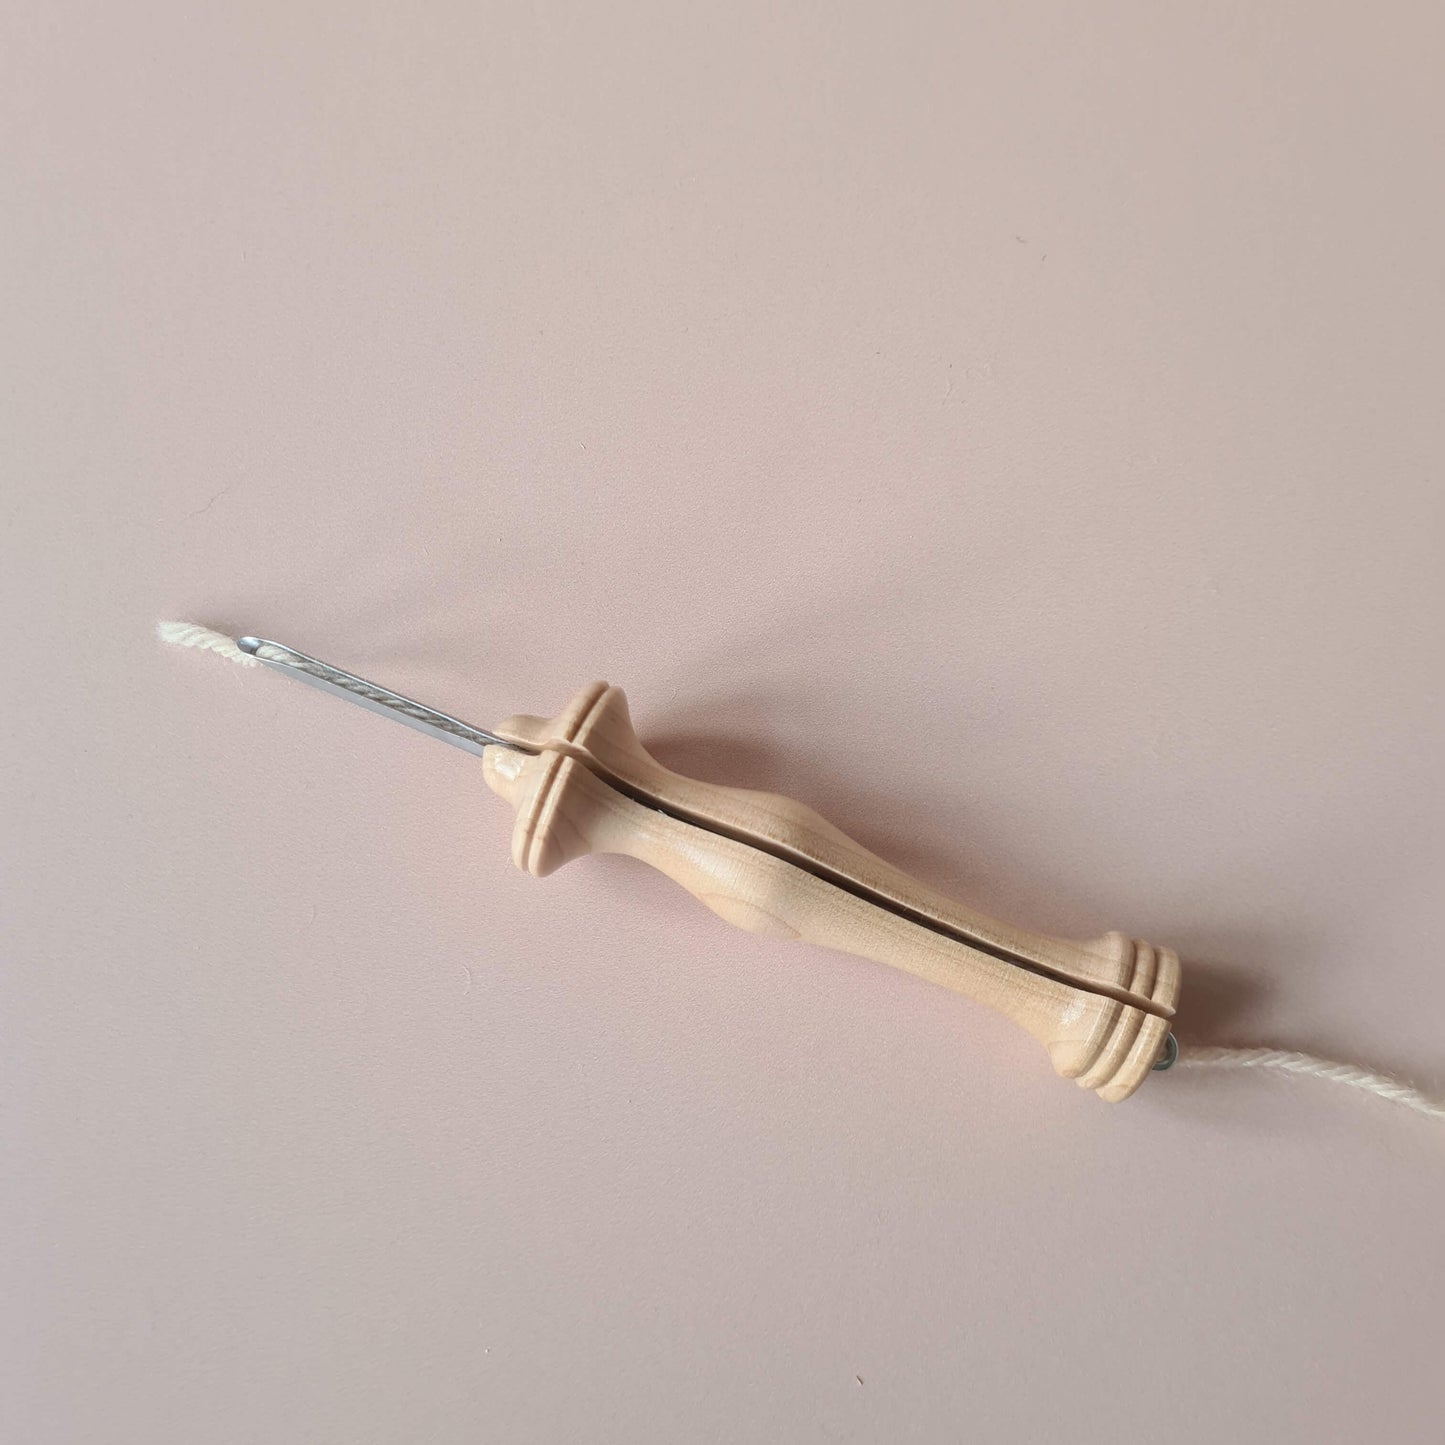 Oxford Fine punch needle